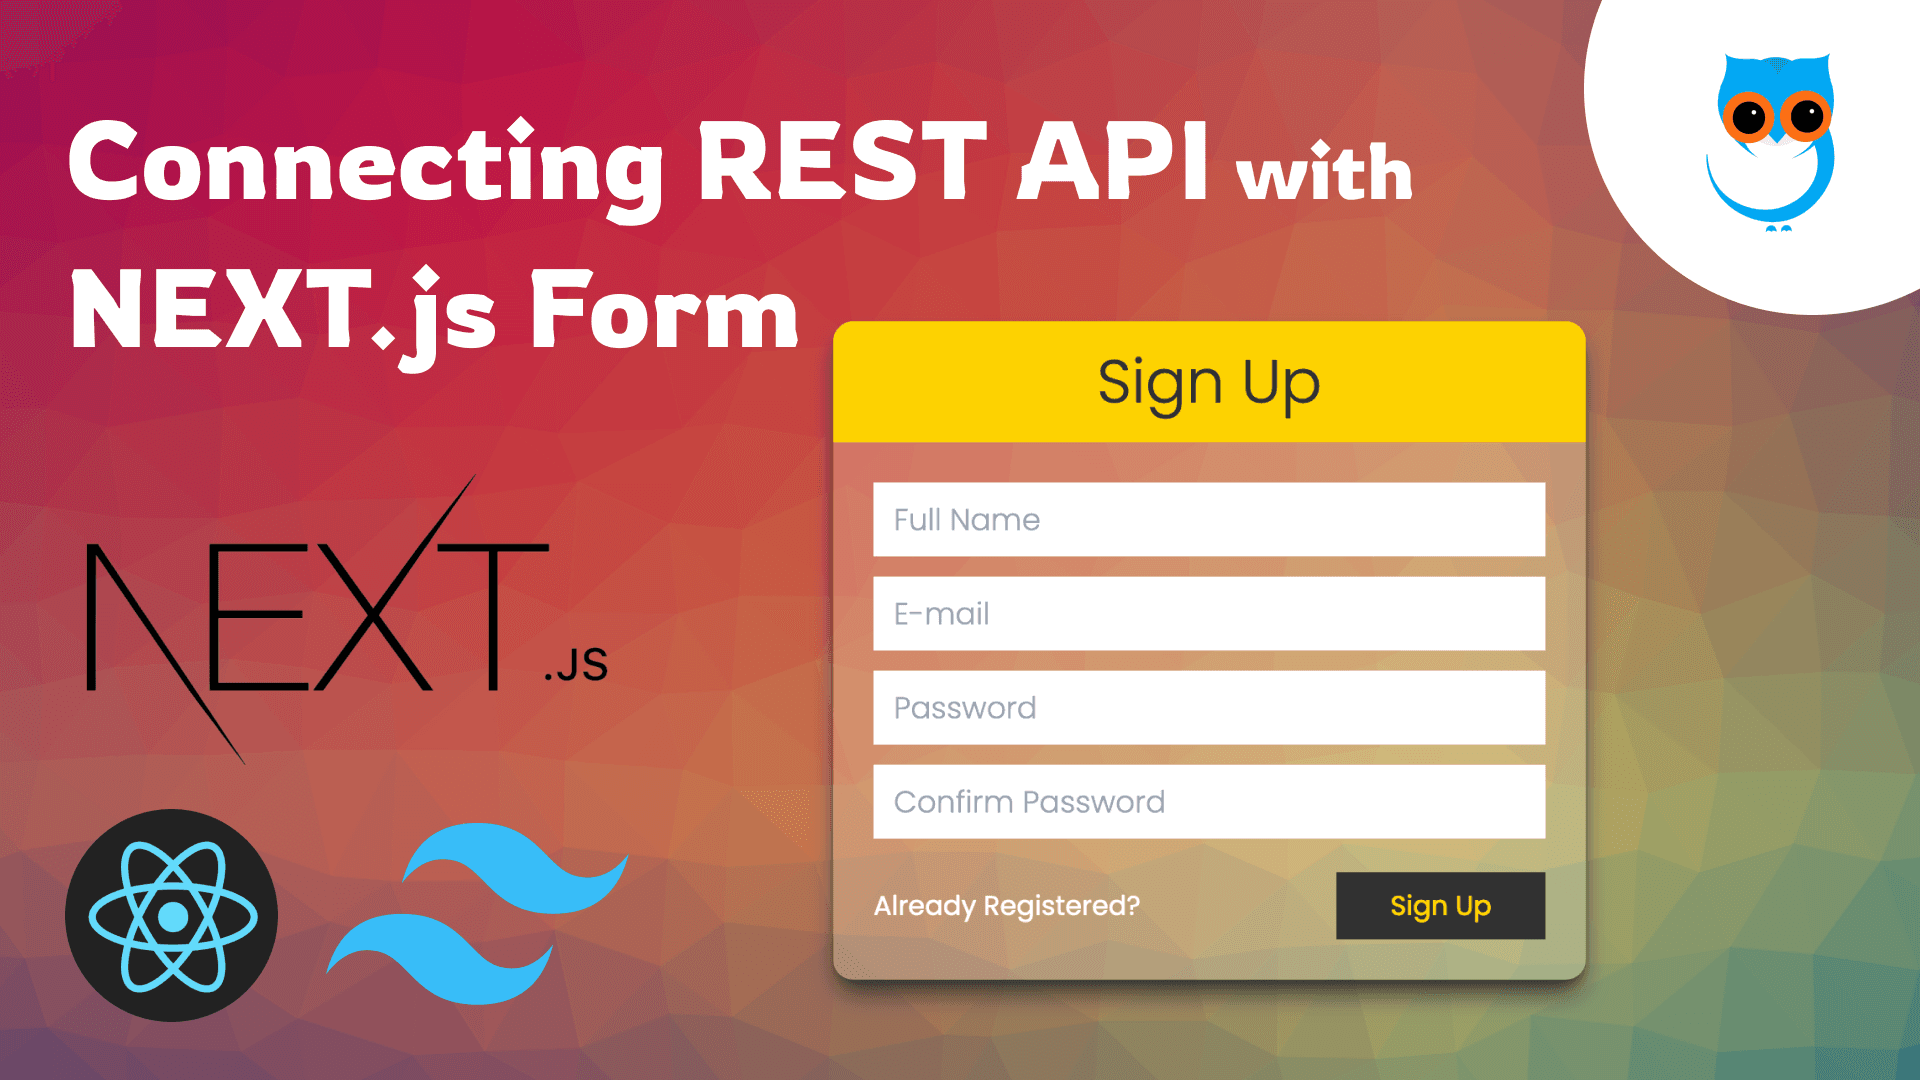 Connecting Next.js Login Form with REST API | Step by Step Tutorial | Geekboots